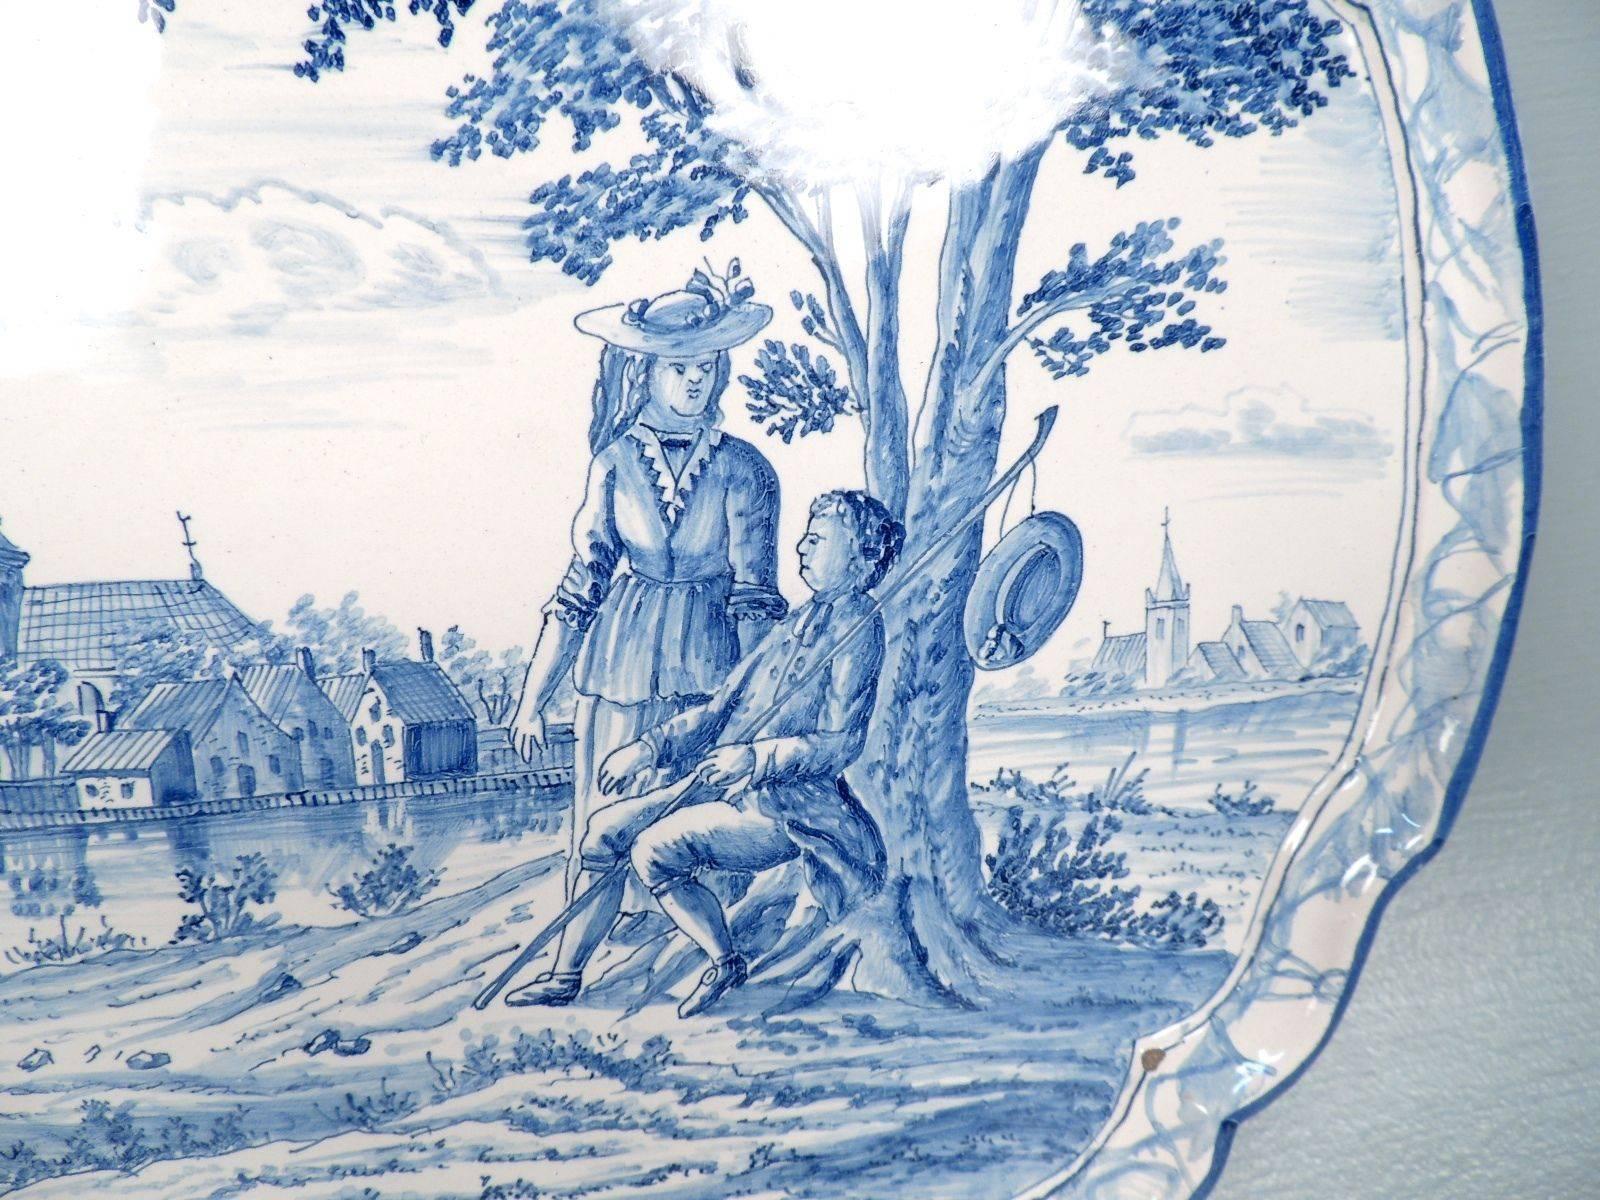 Baroque Revival Antique Blue and White Dutch Delft Wall Plaque with an Amorous Young Couple